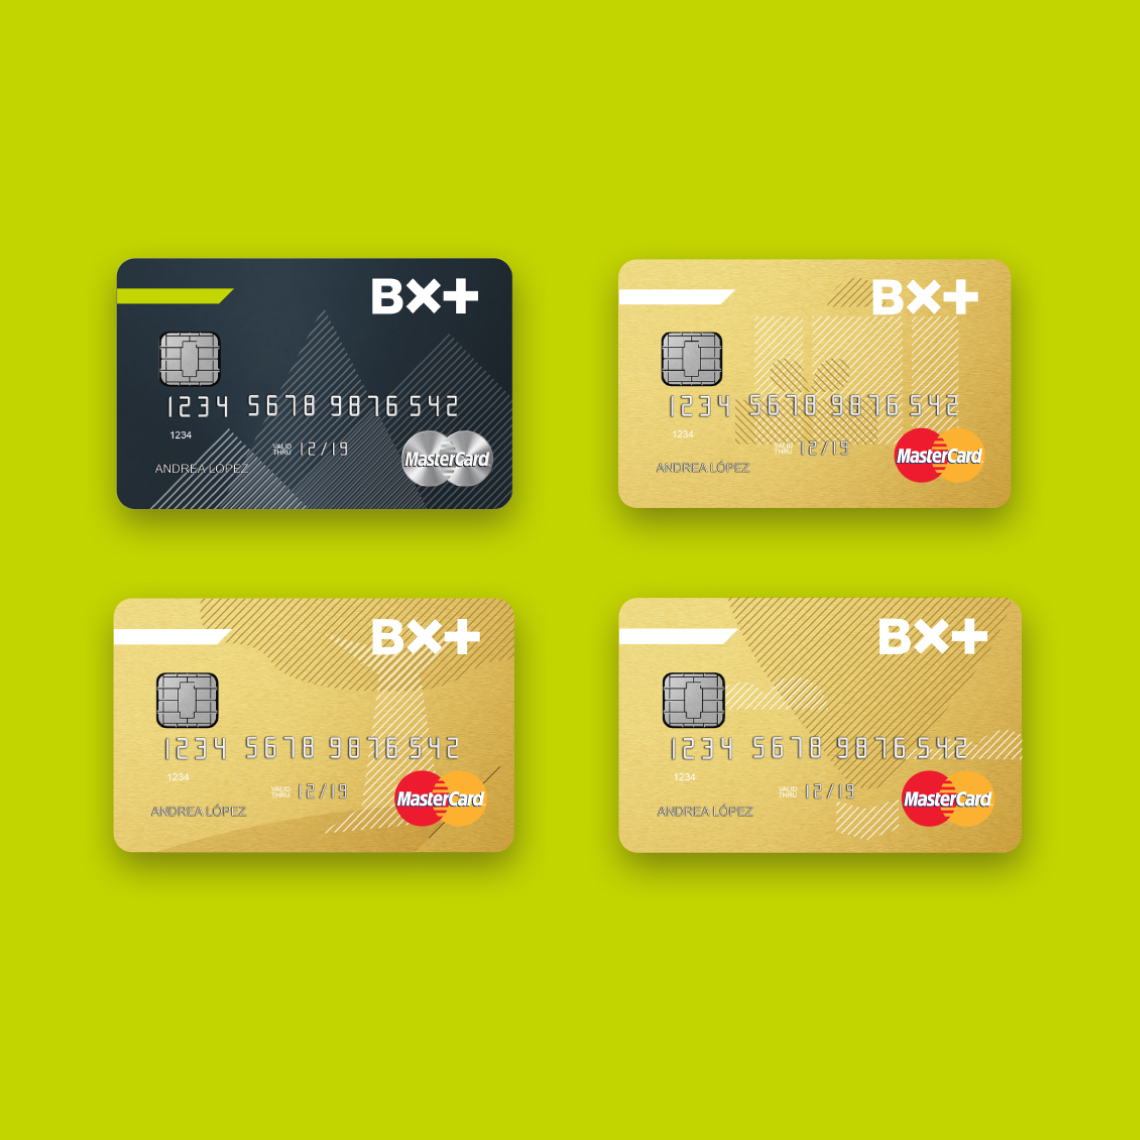 Examples of credit cards with the brand identity of BX+ applied